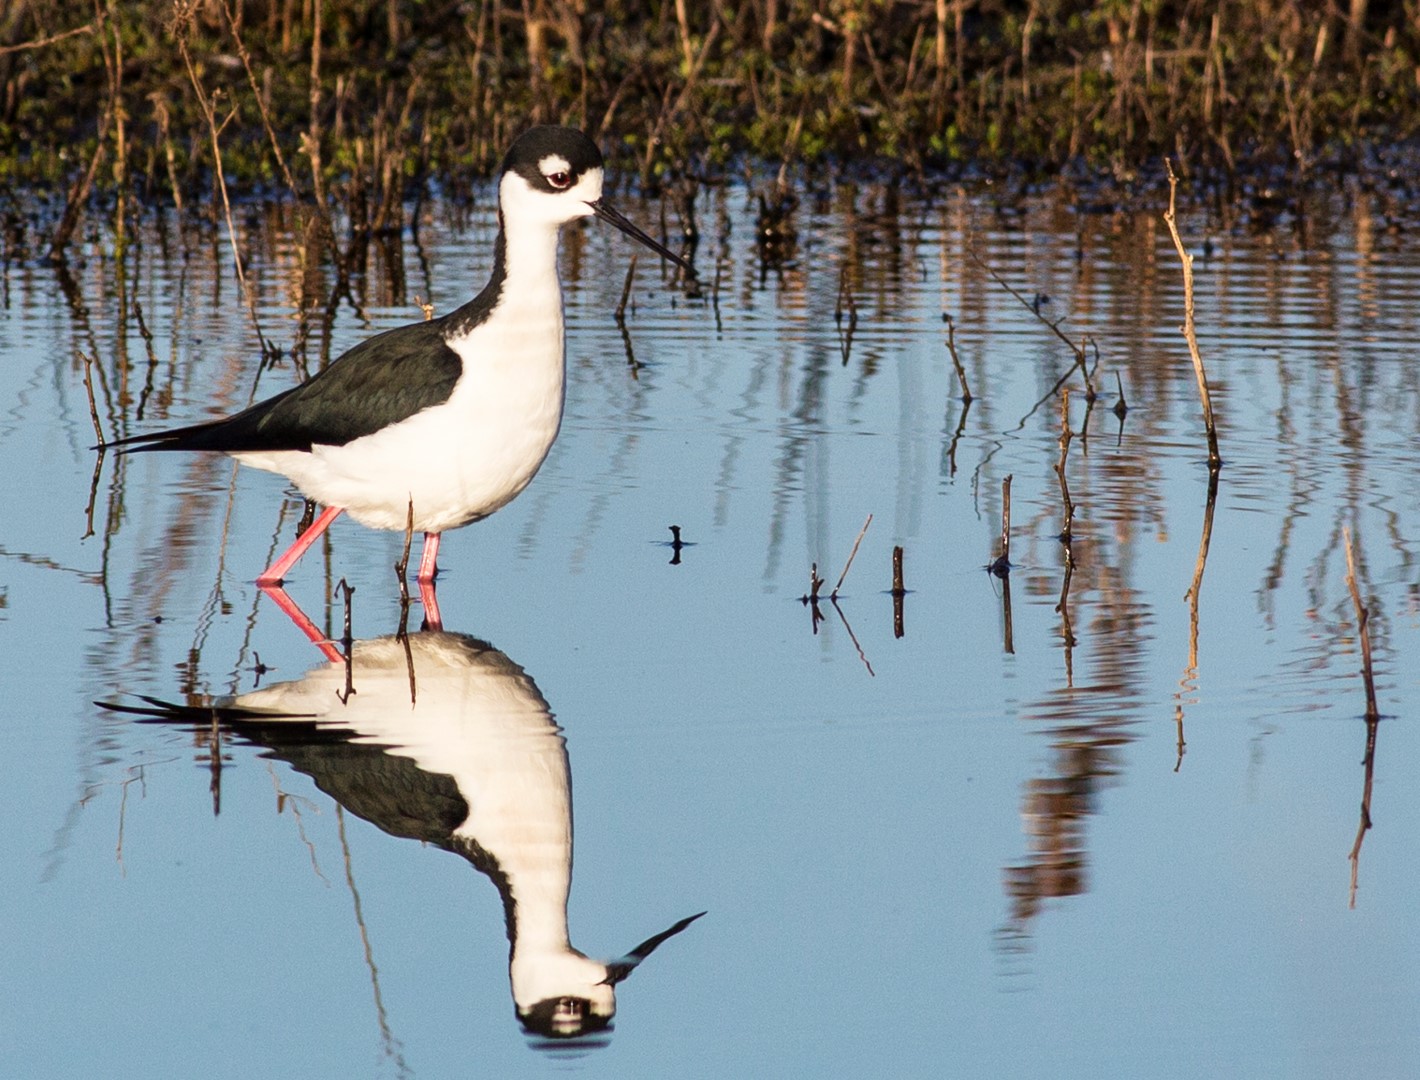 Go back in time 150 years as you stroll through the 50,000-acre Cosumnes River Preserve, where farmland was restored to its former natural landscape state with help from the Nature Conservancy, Ducks Unlimited, and state and federal agencies. Here, a black-necked stilt searches for prey. Photo by Bob Wick, courtesy BLM.